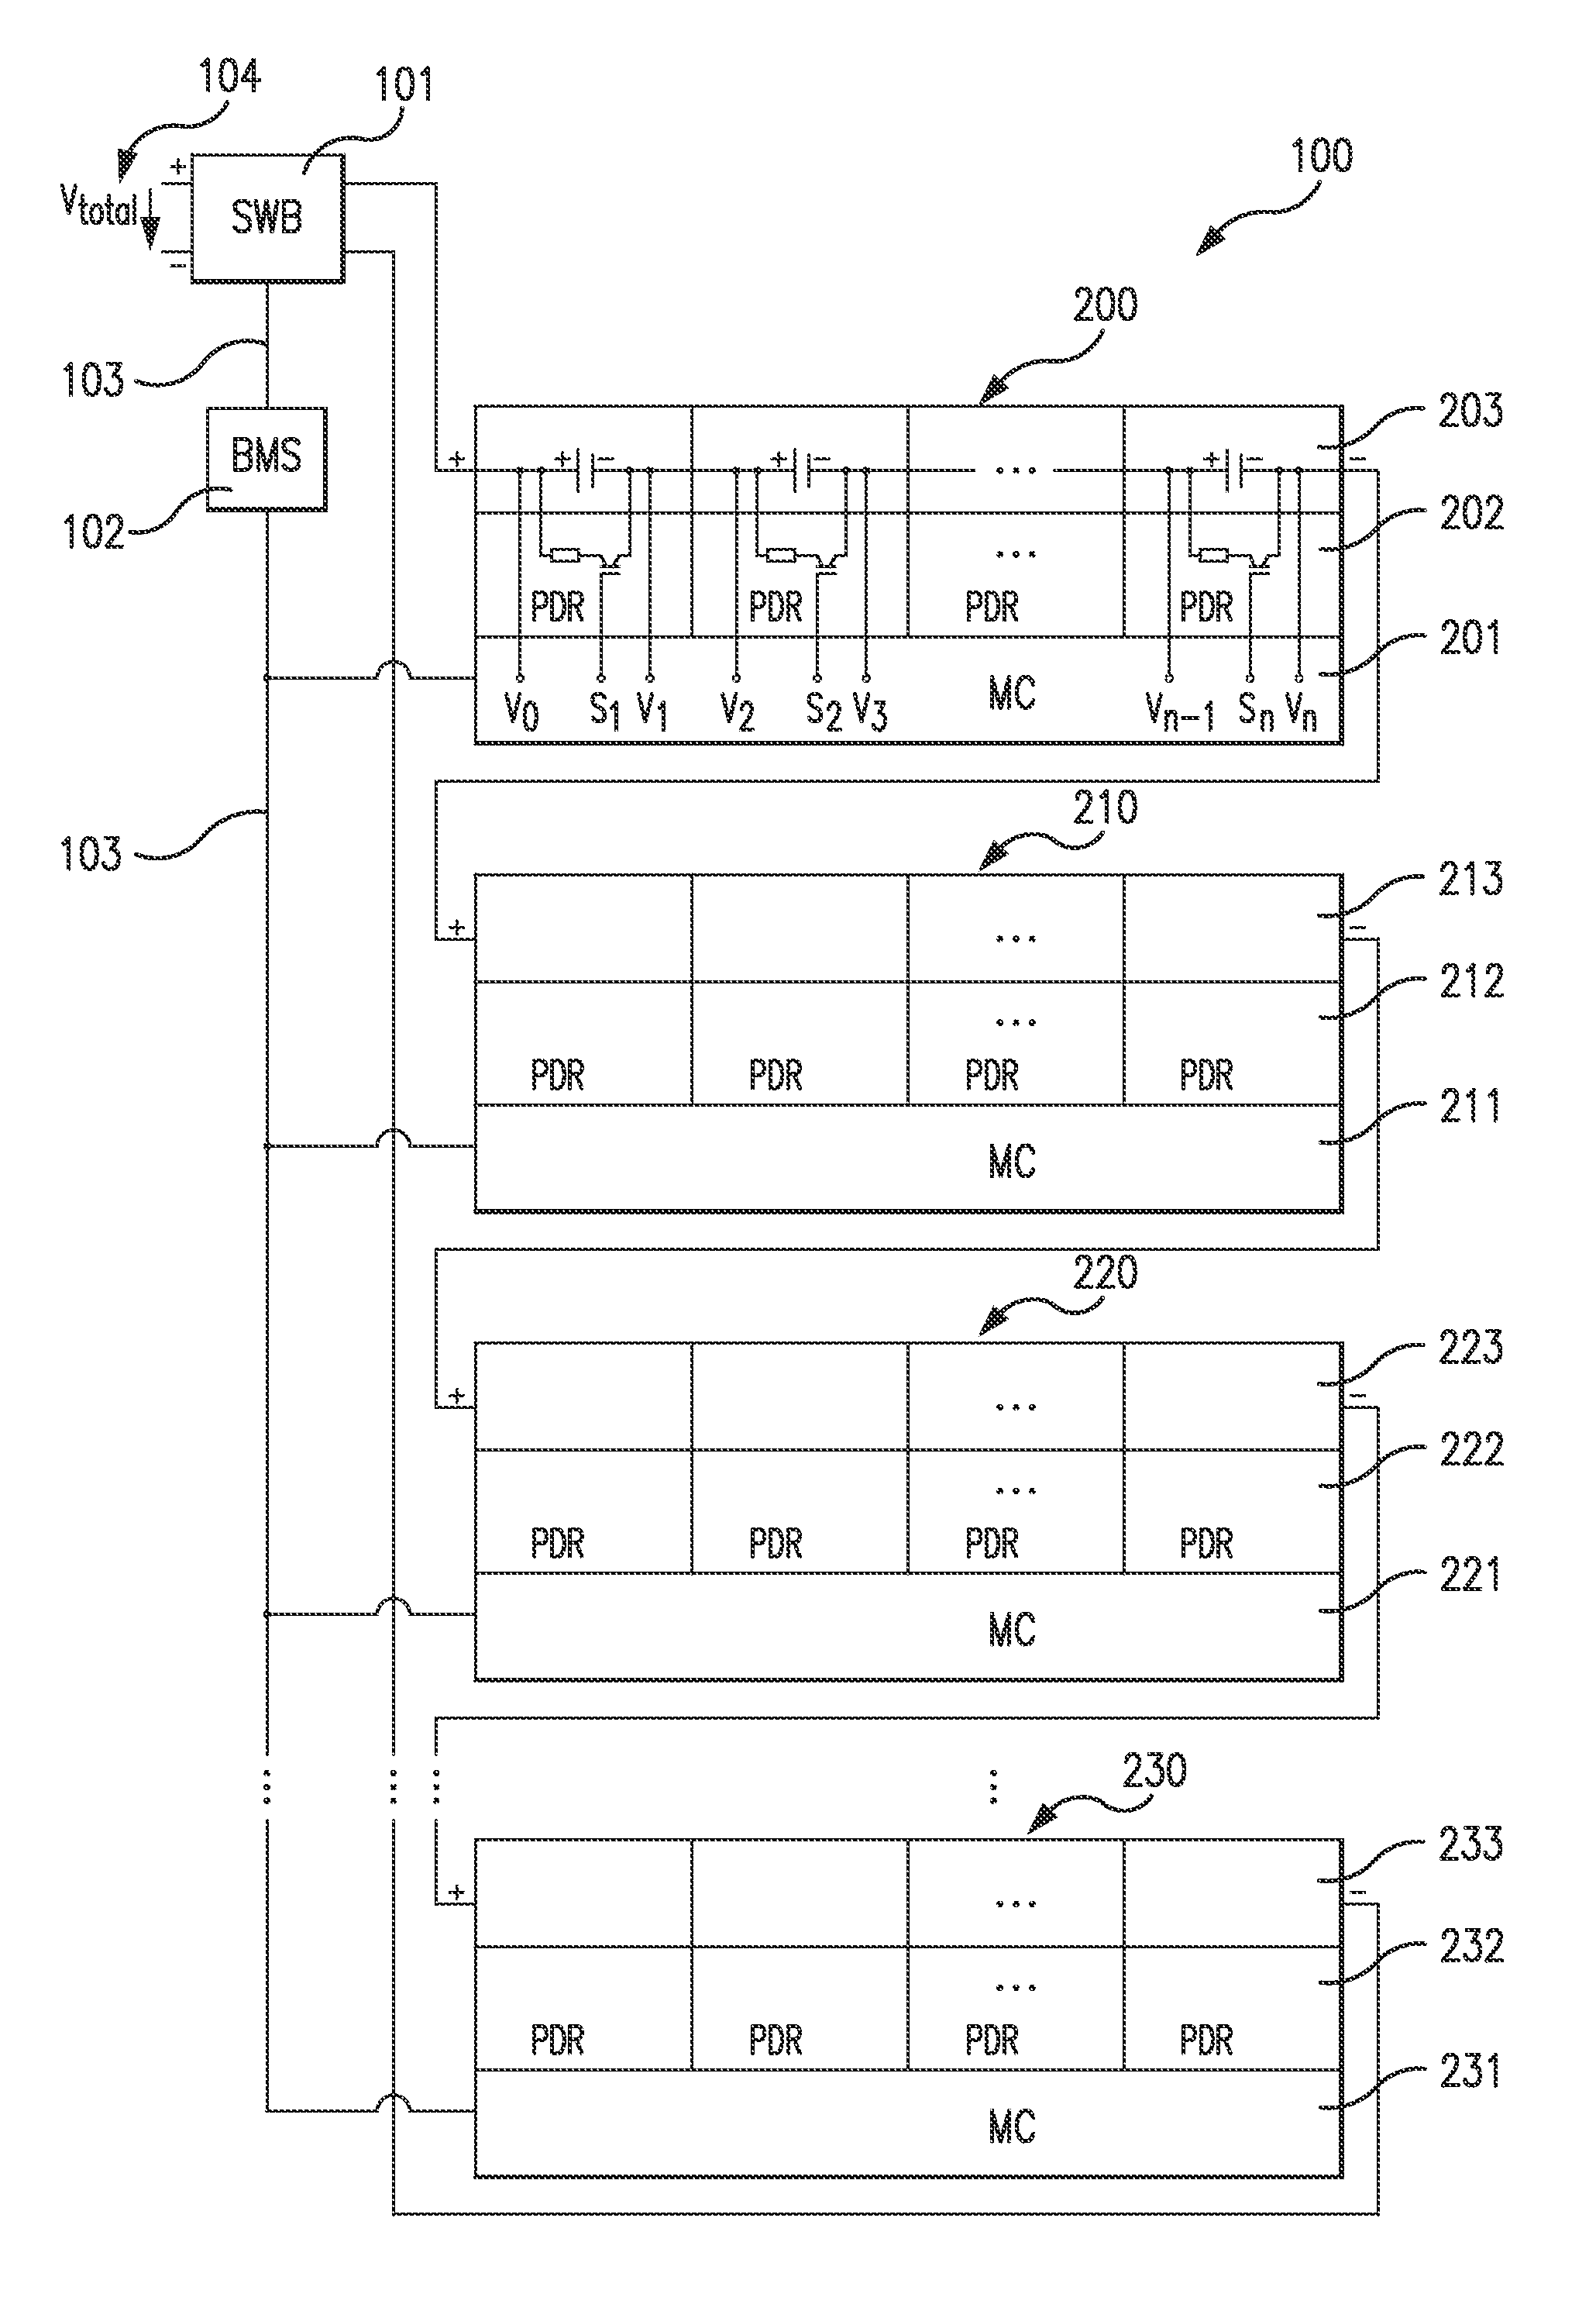 Balancing Voltage for a Multi-Cell Battery System